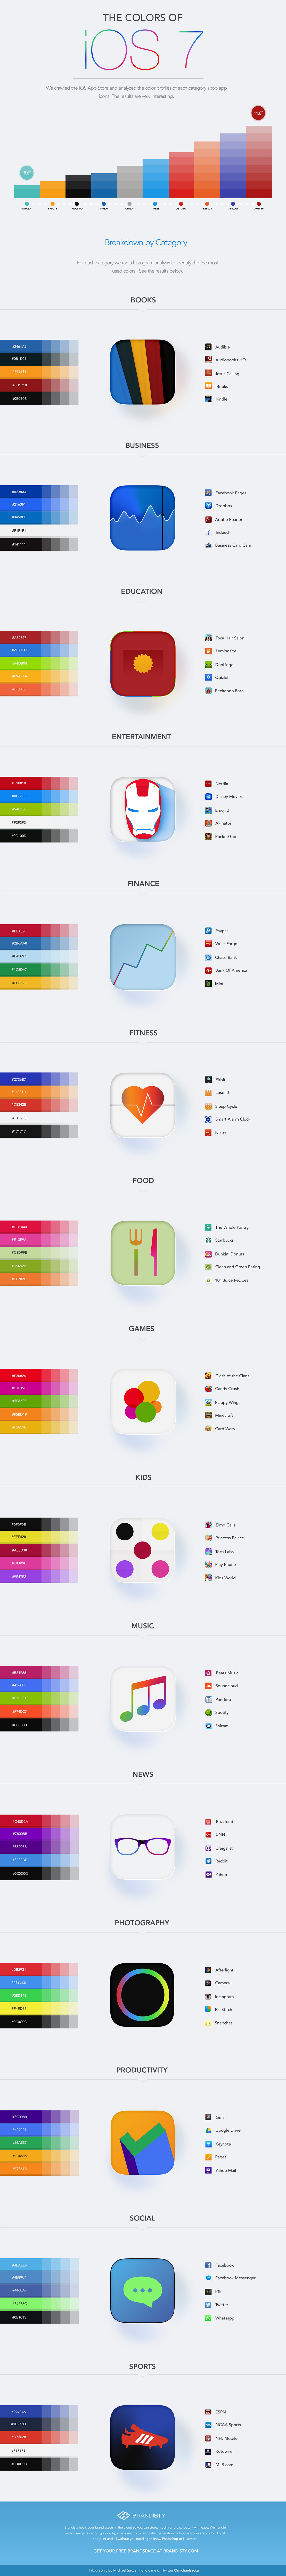 The Colors of the App Store [Infographic]